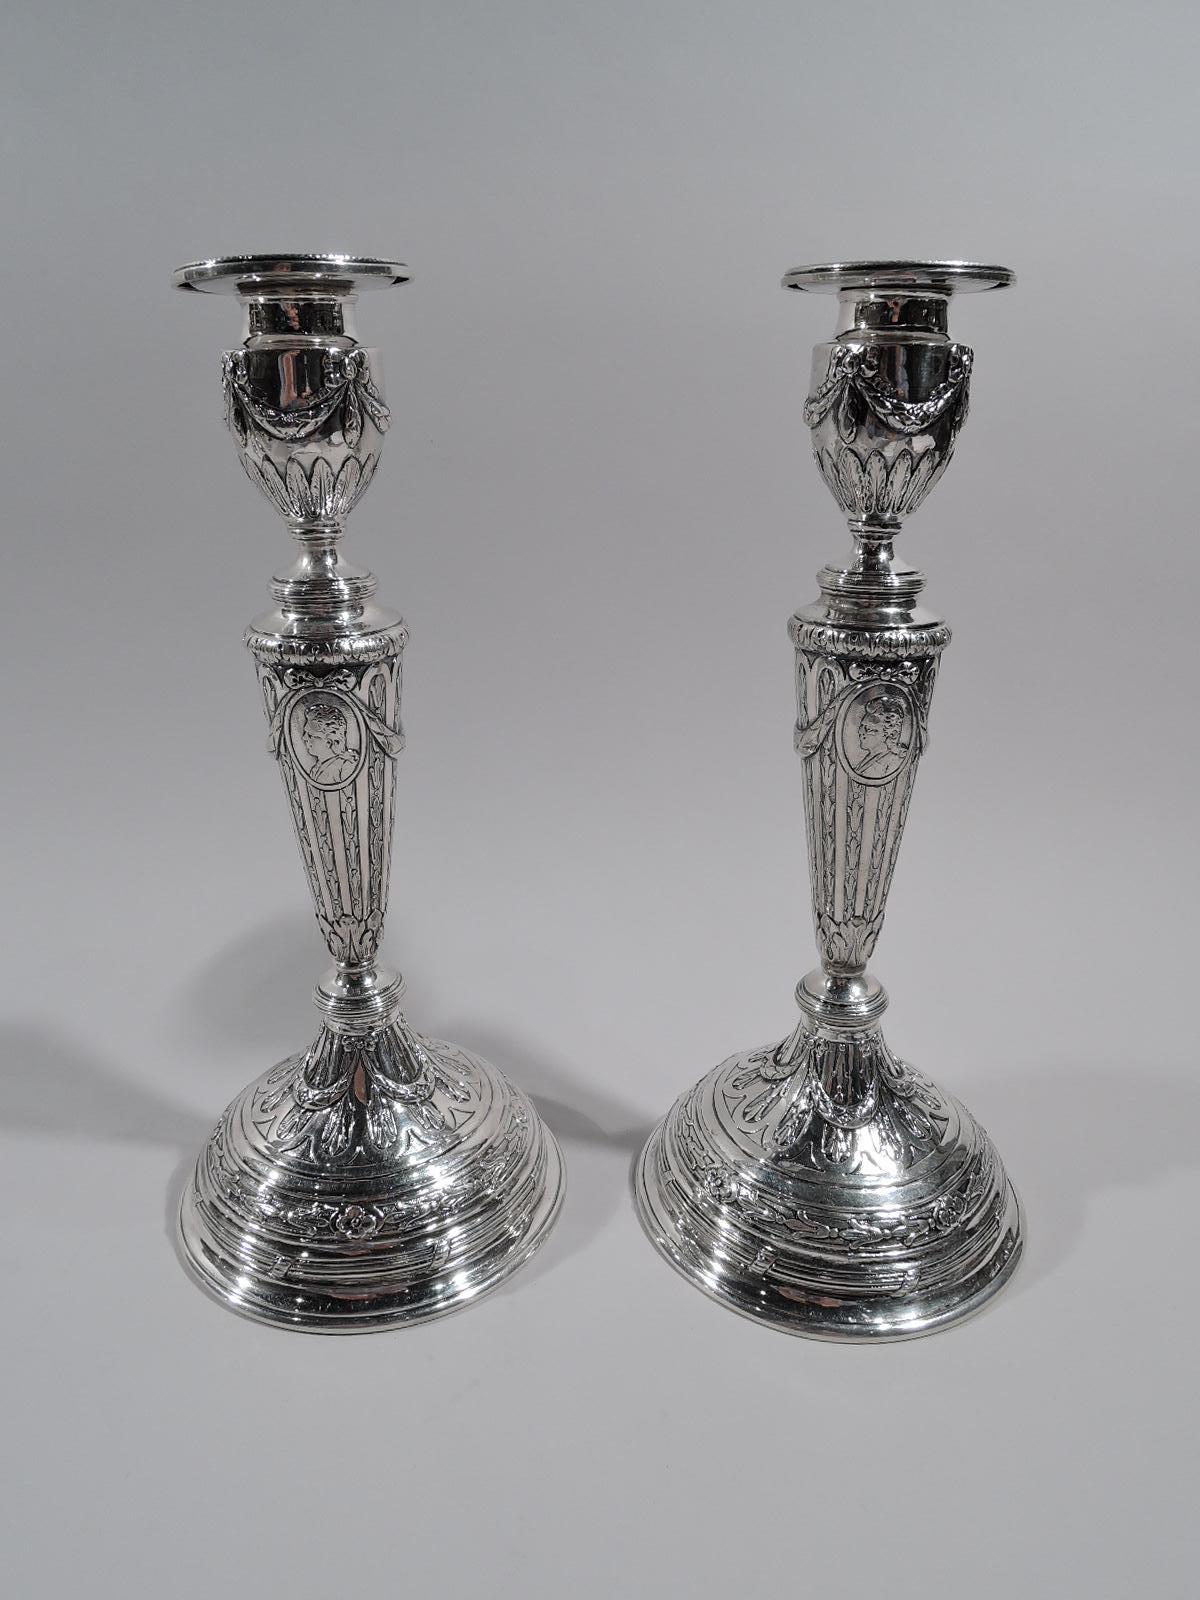 Set of 4 German Rococo 800 silver candlesticks, circa 1900. Each: tapering columnar shaft on knopped and domed foot. Urn socket with detachable bobeche. Raised ornament: gadroons inset with stylized flowers, foliage, bow-tied swags, and frames with